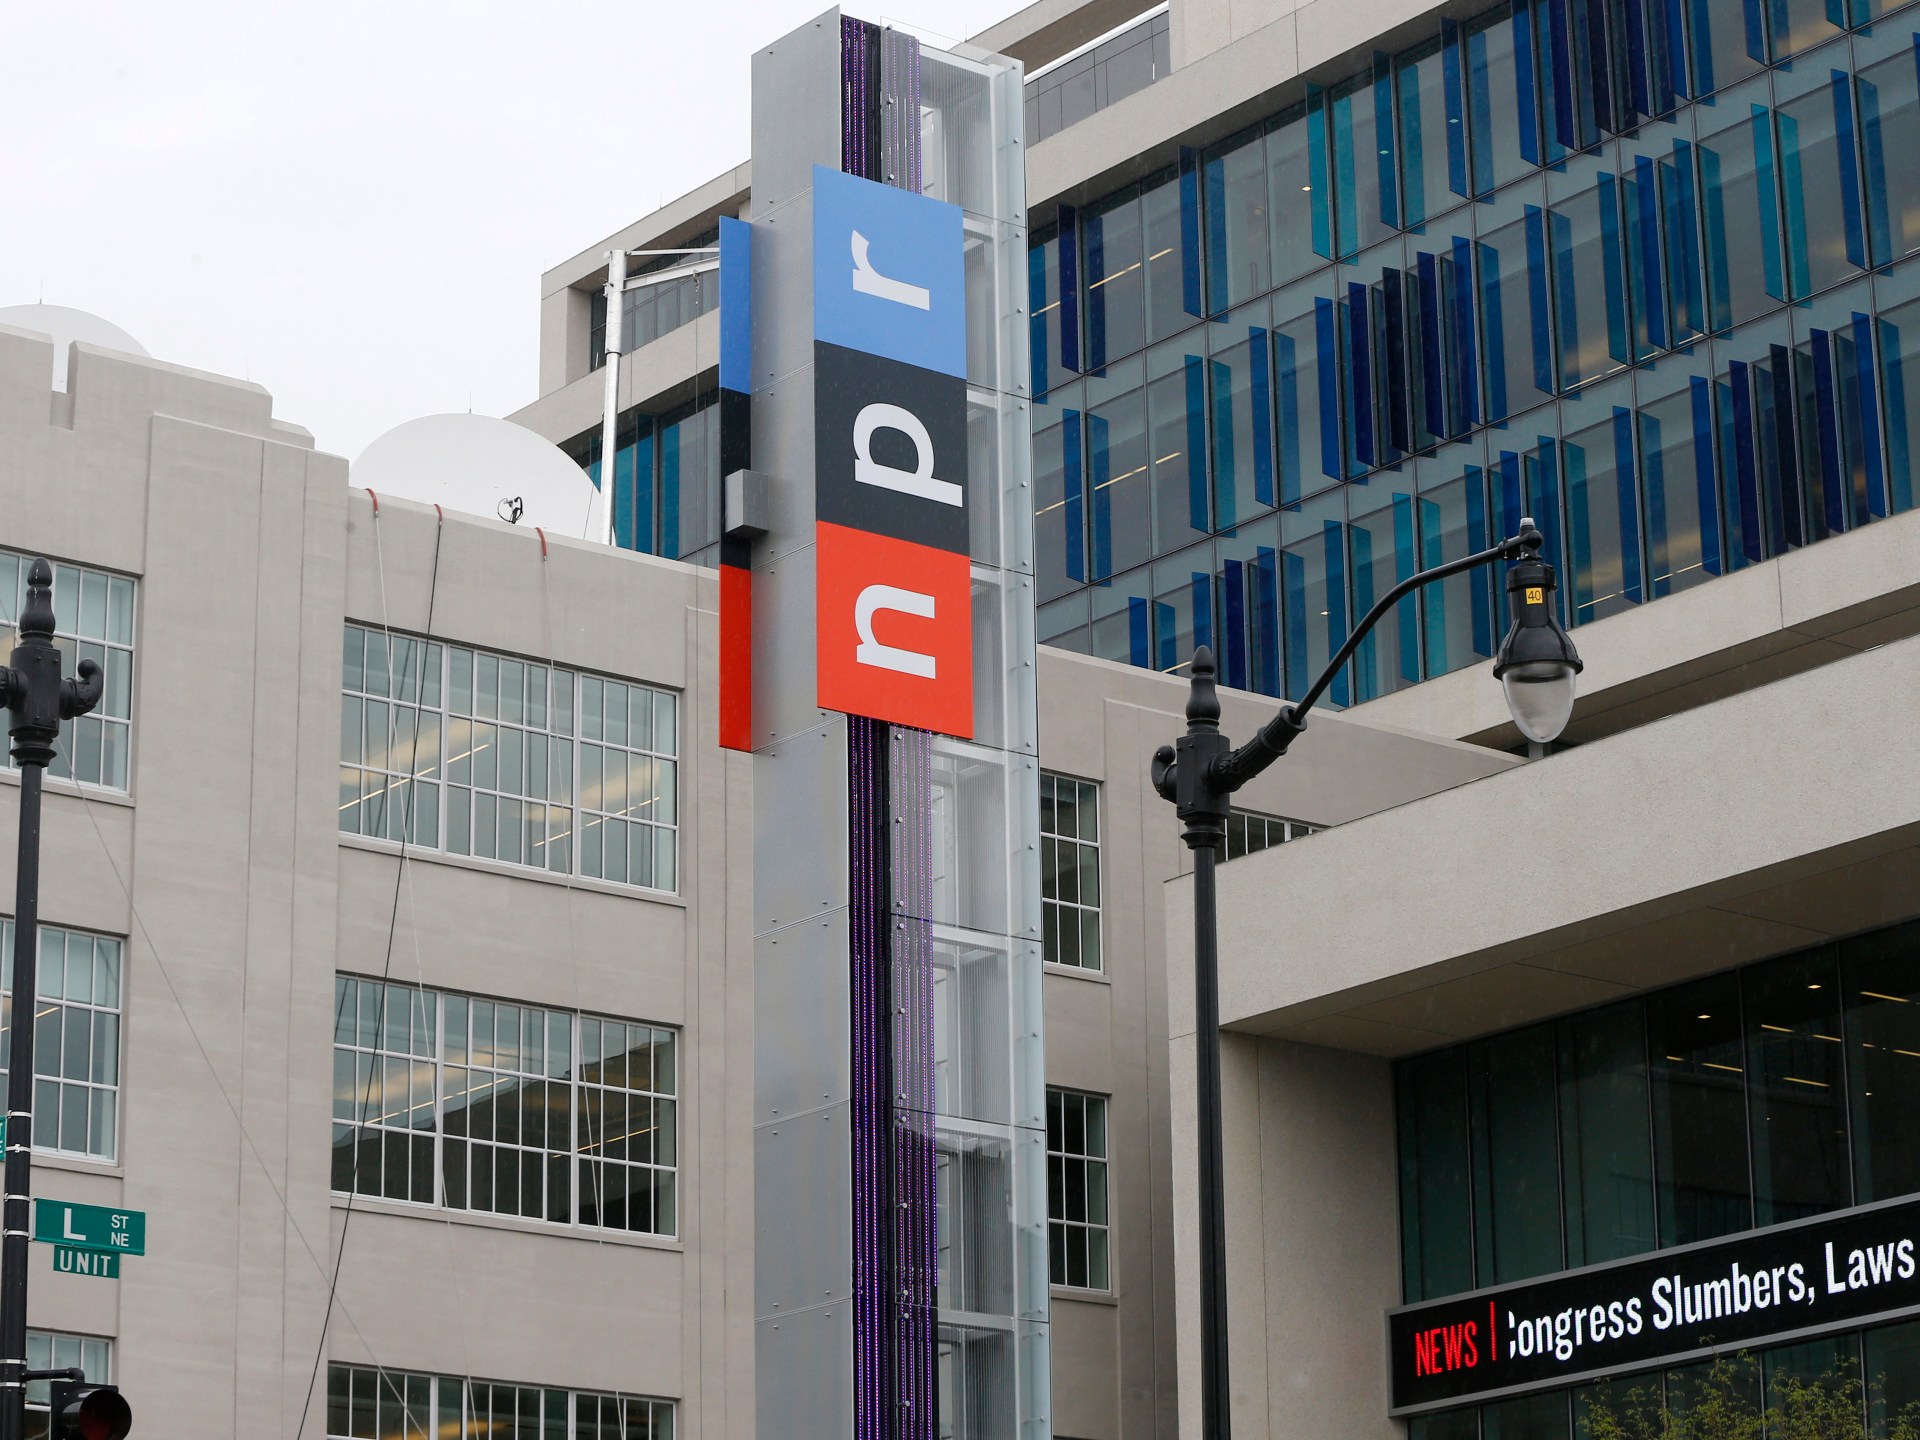 NPR editor resigns after accusing US outlet of liberal bias